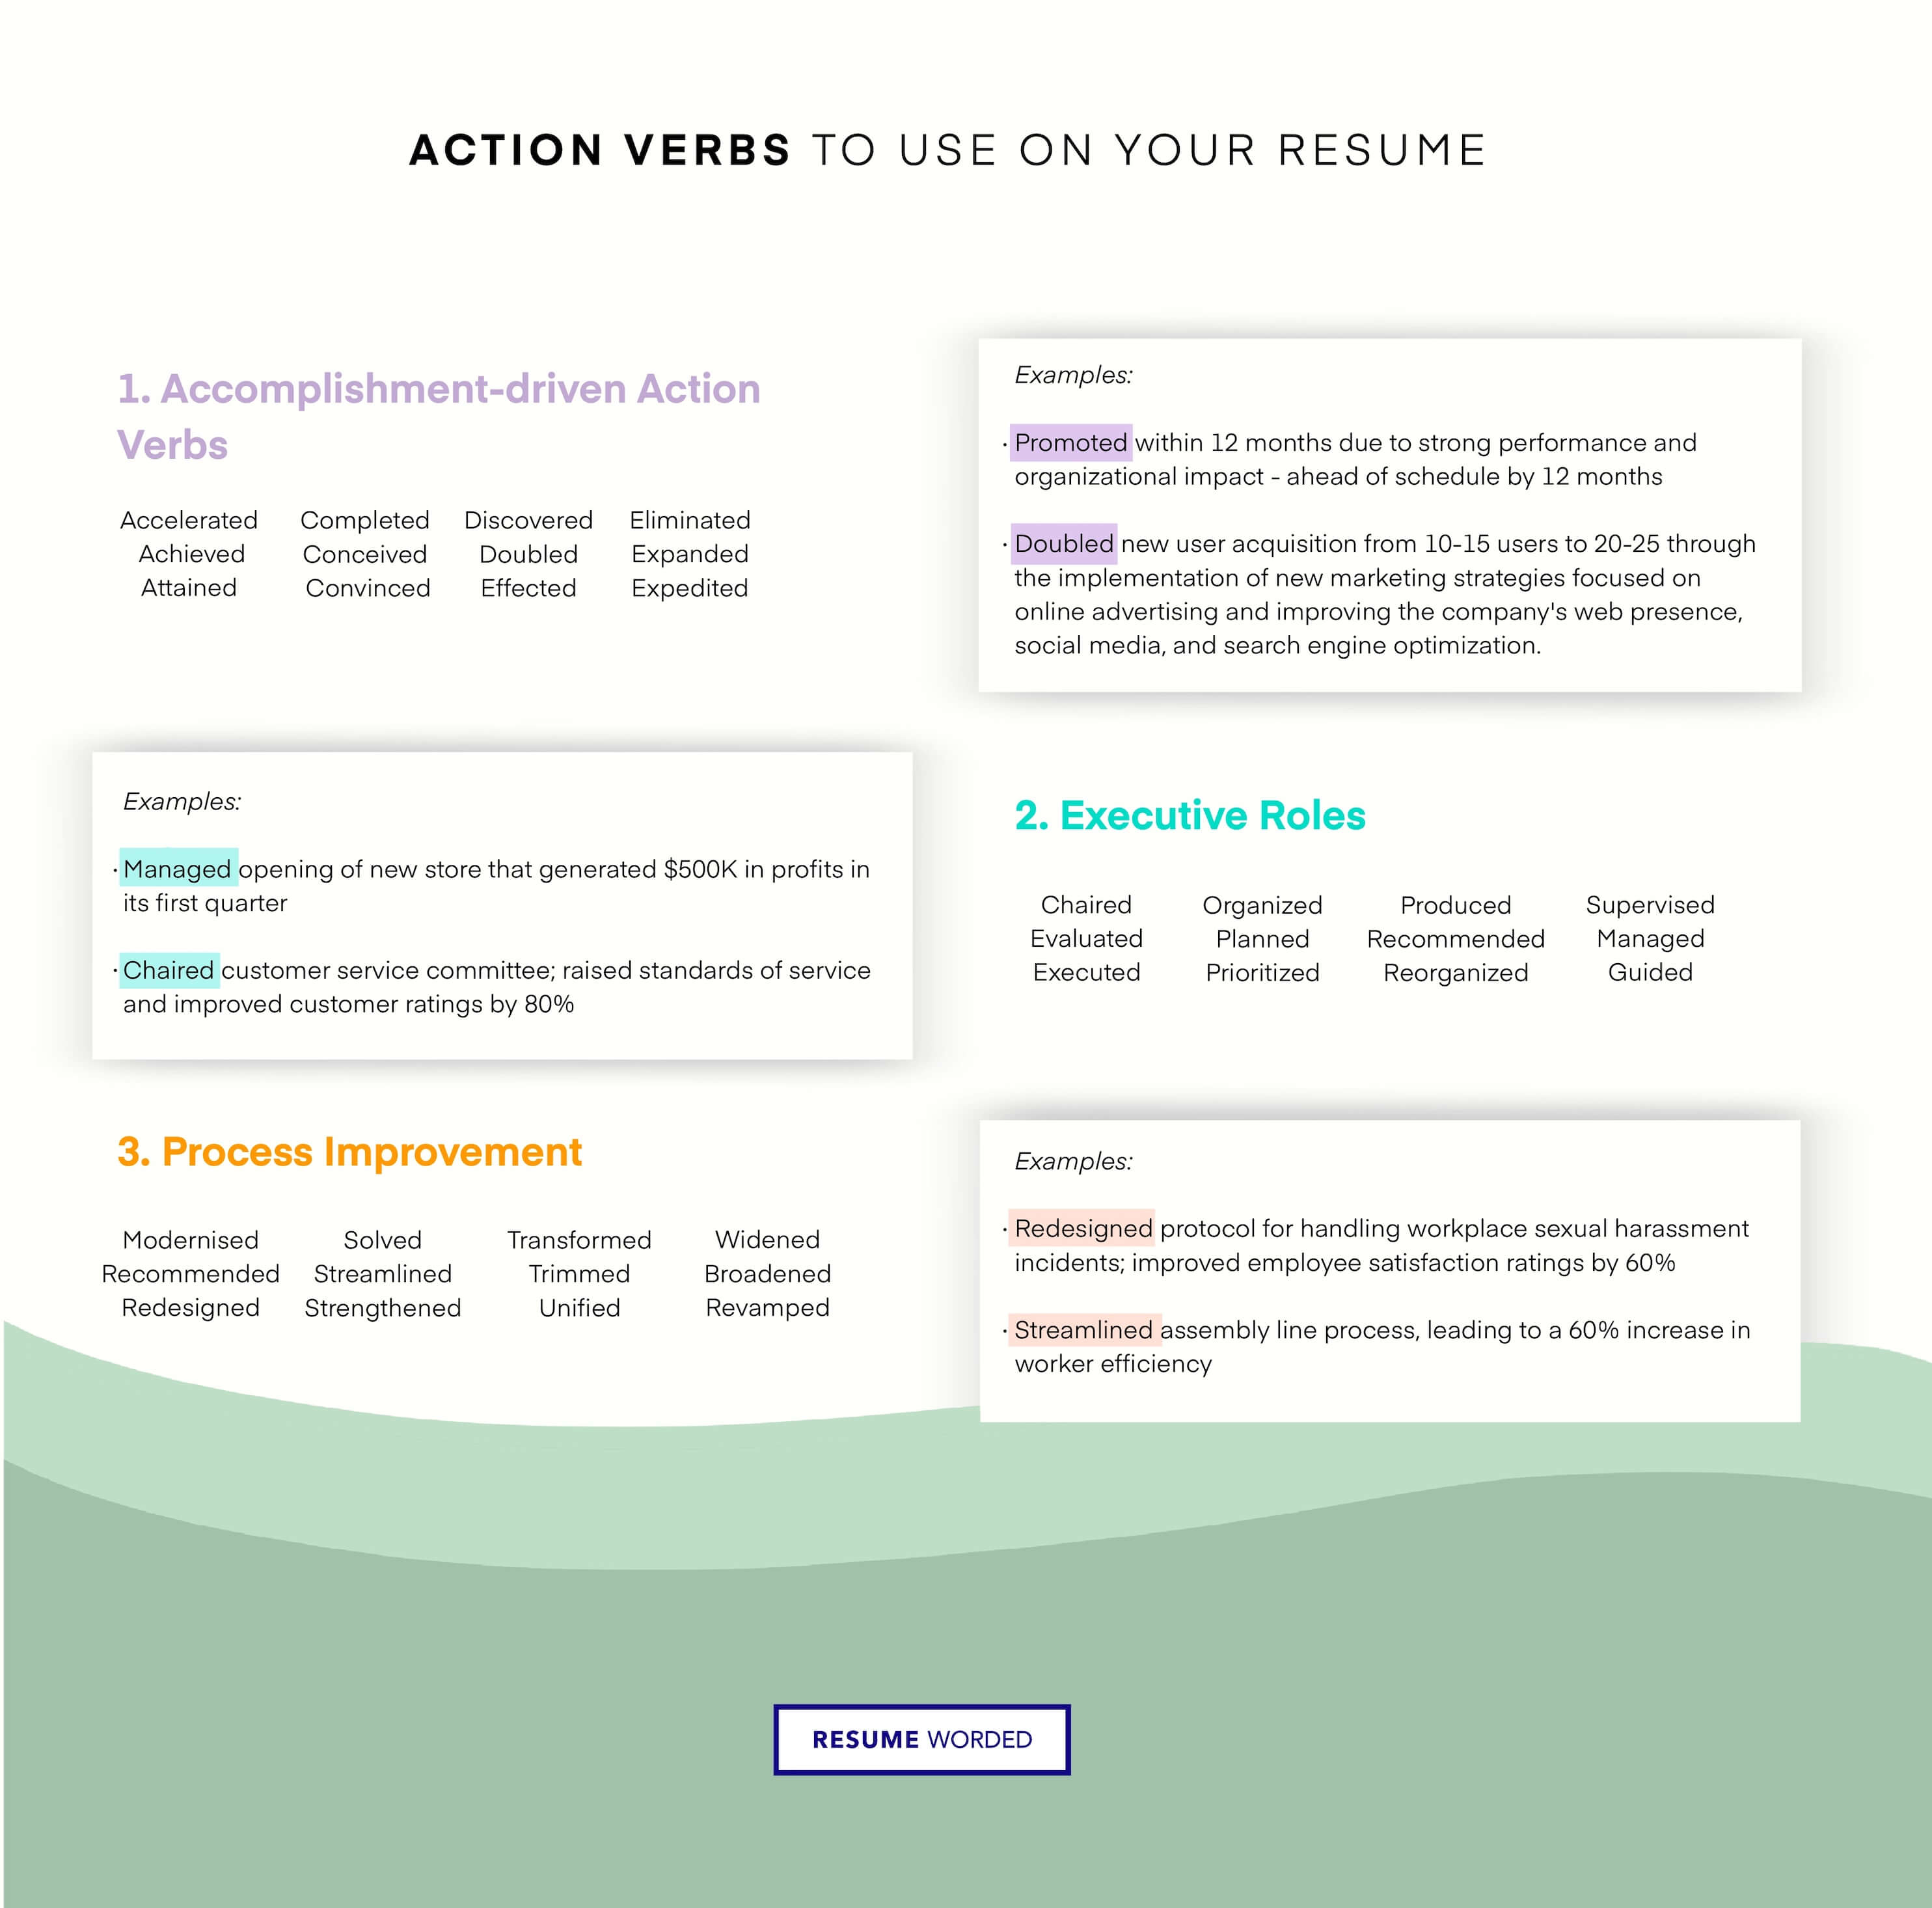 Use strong action verbs and metrics to highlight sales accomplishments - Sales Account Manager Resume